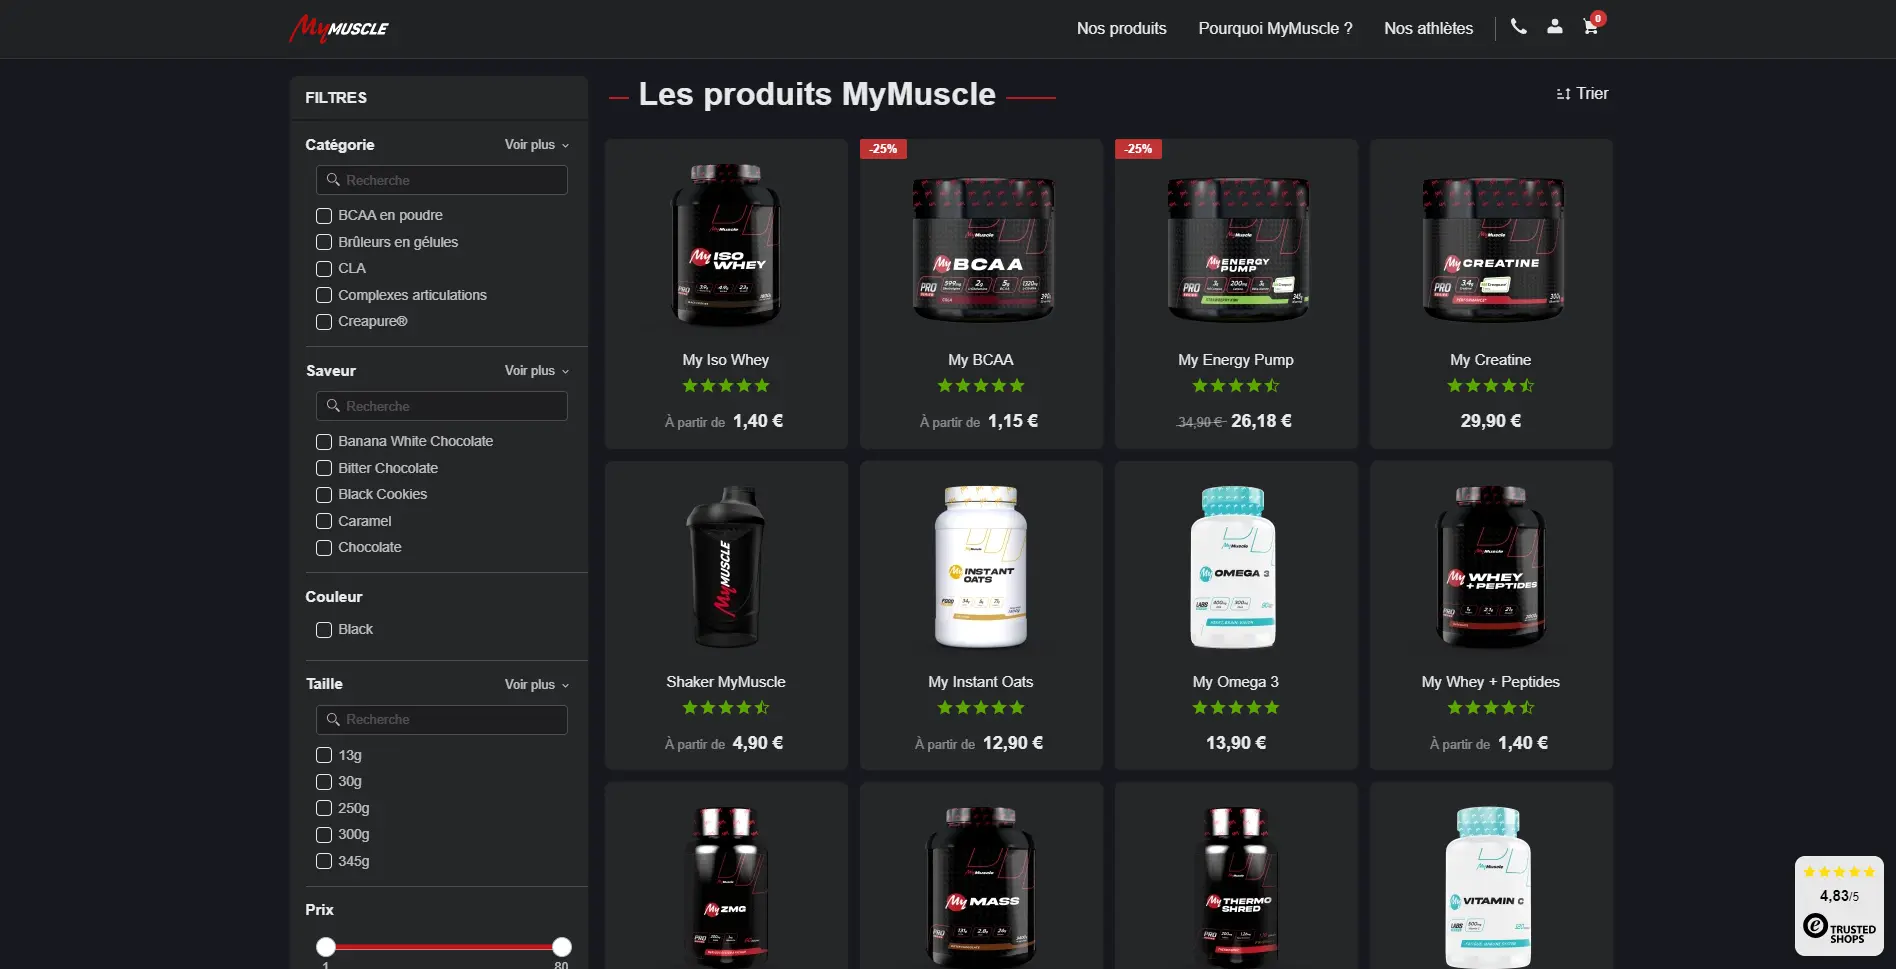 Products list page